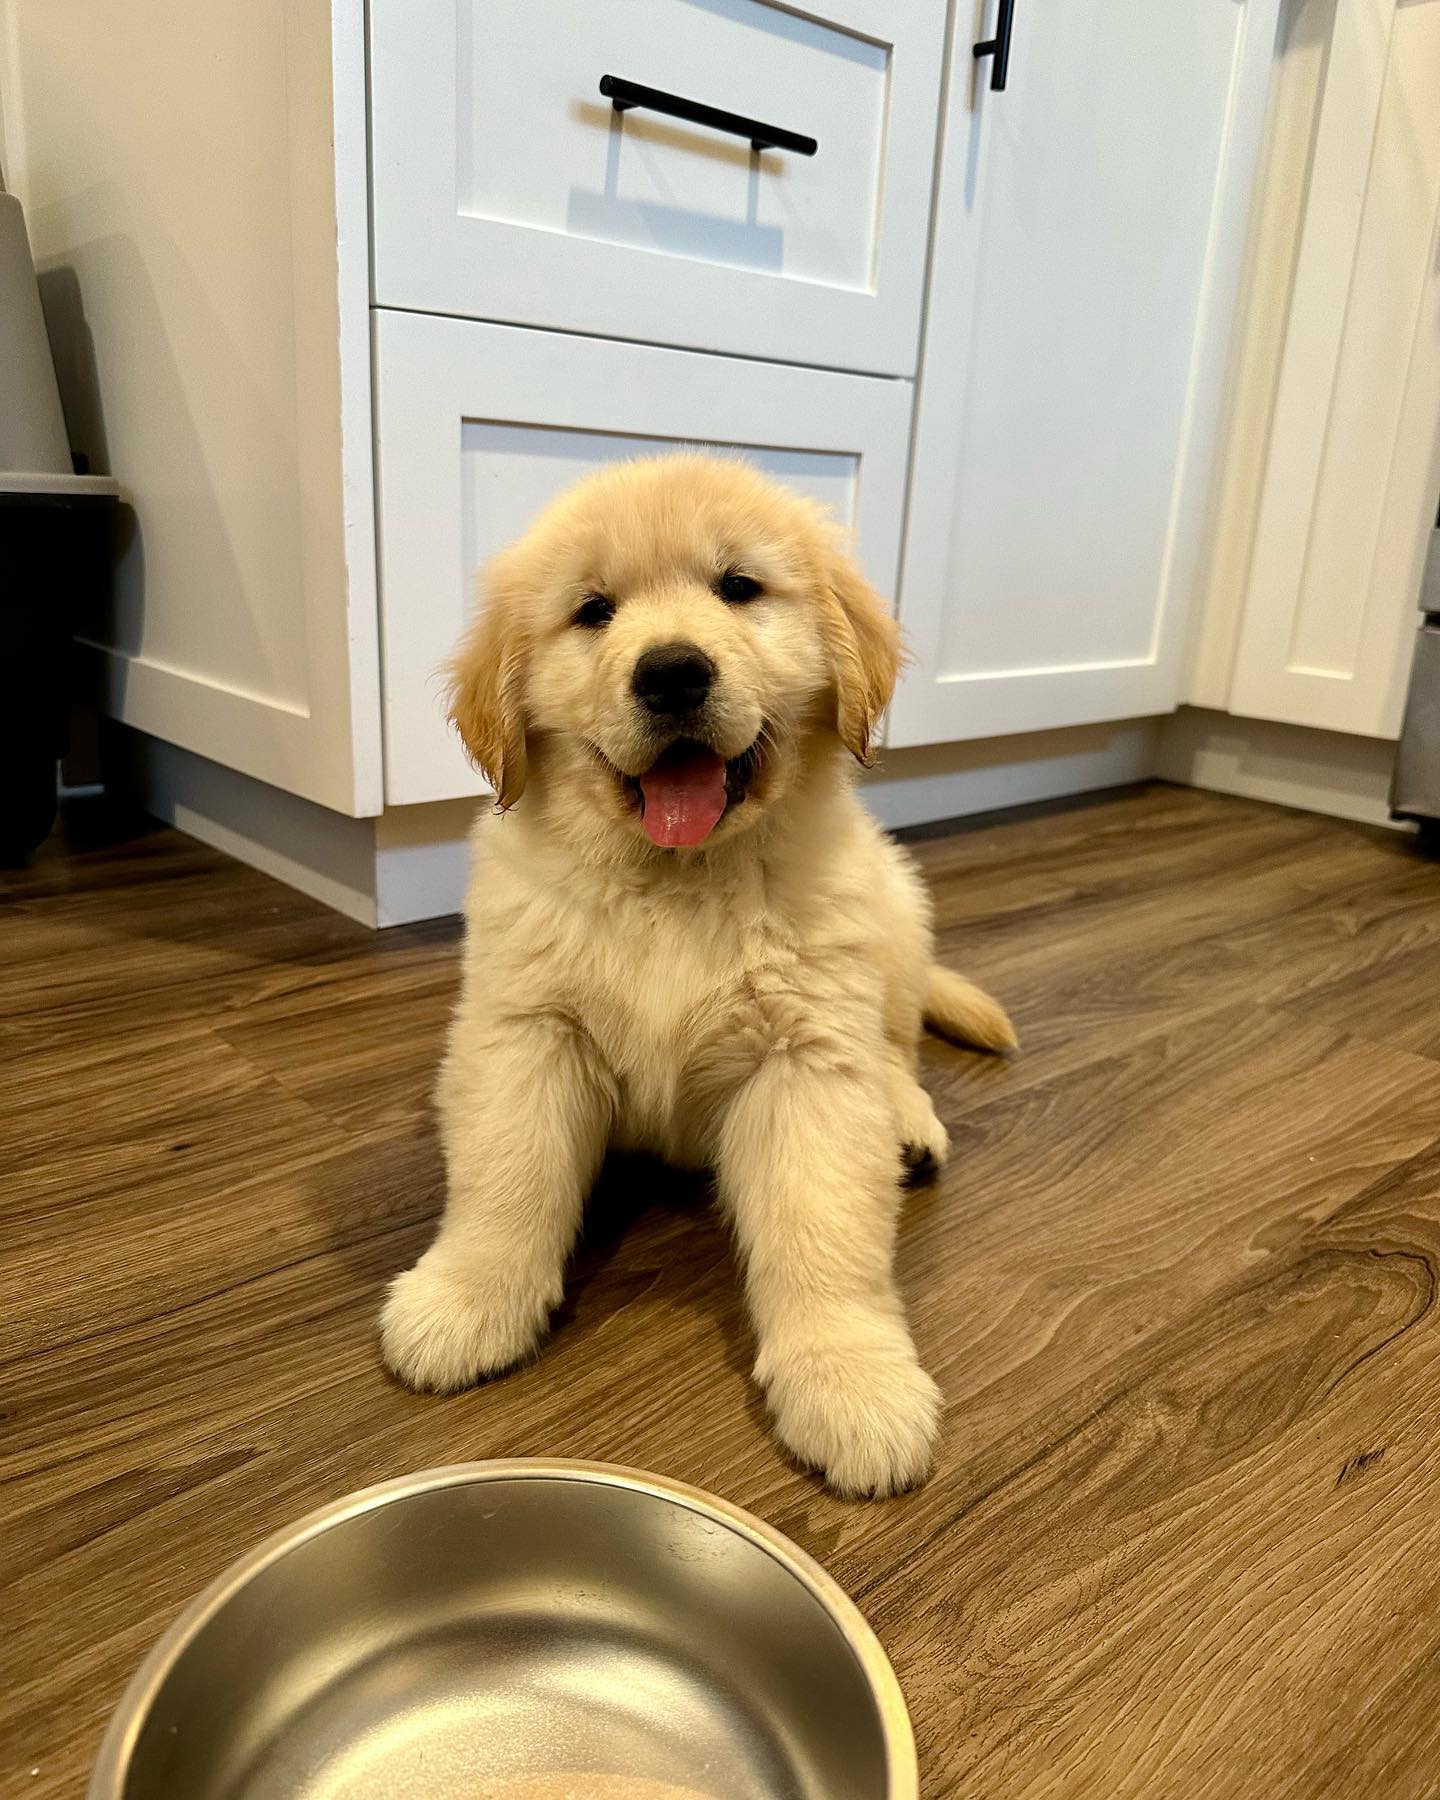 A golden puppy sits in front of a dog bowl with it's tongue haning out.